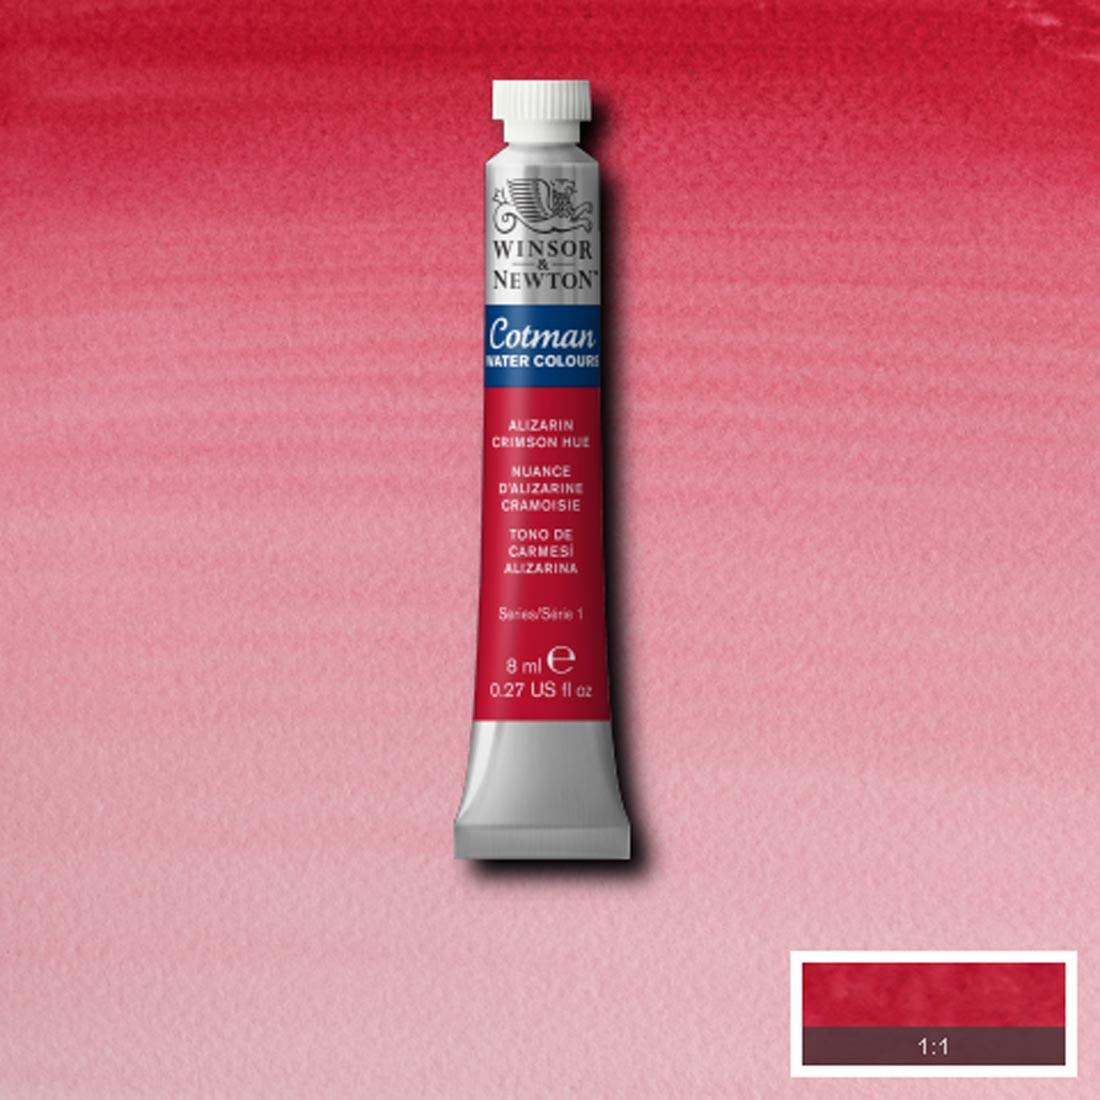 Tube of Alizarin Crimson Hue Winsor and Newton Cotman Water Colour with a paint swatch for the background